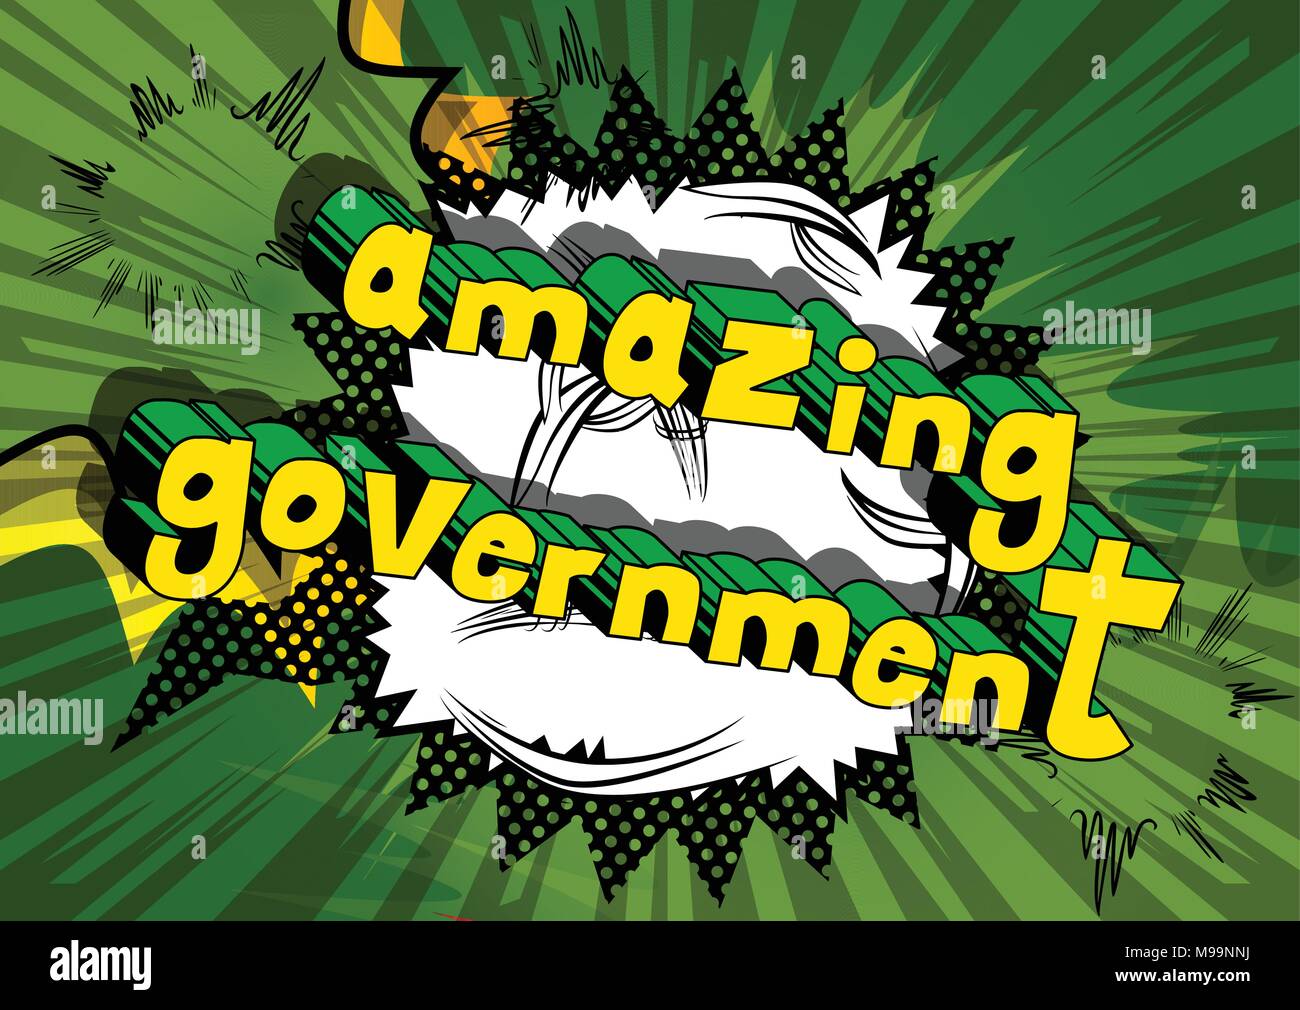 Amazing Government - Comic book style phrase on abstract background. Stock Vector